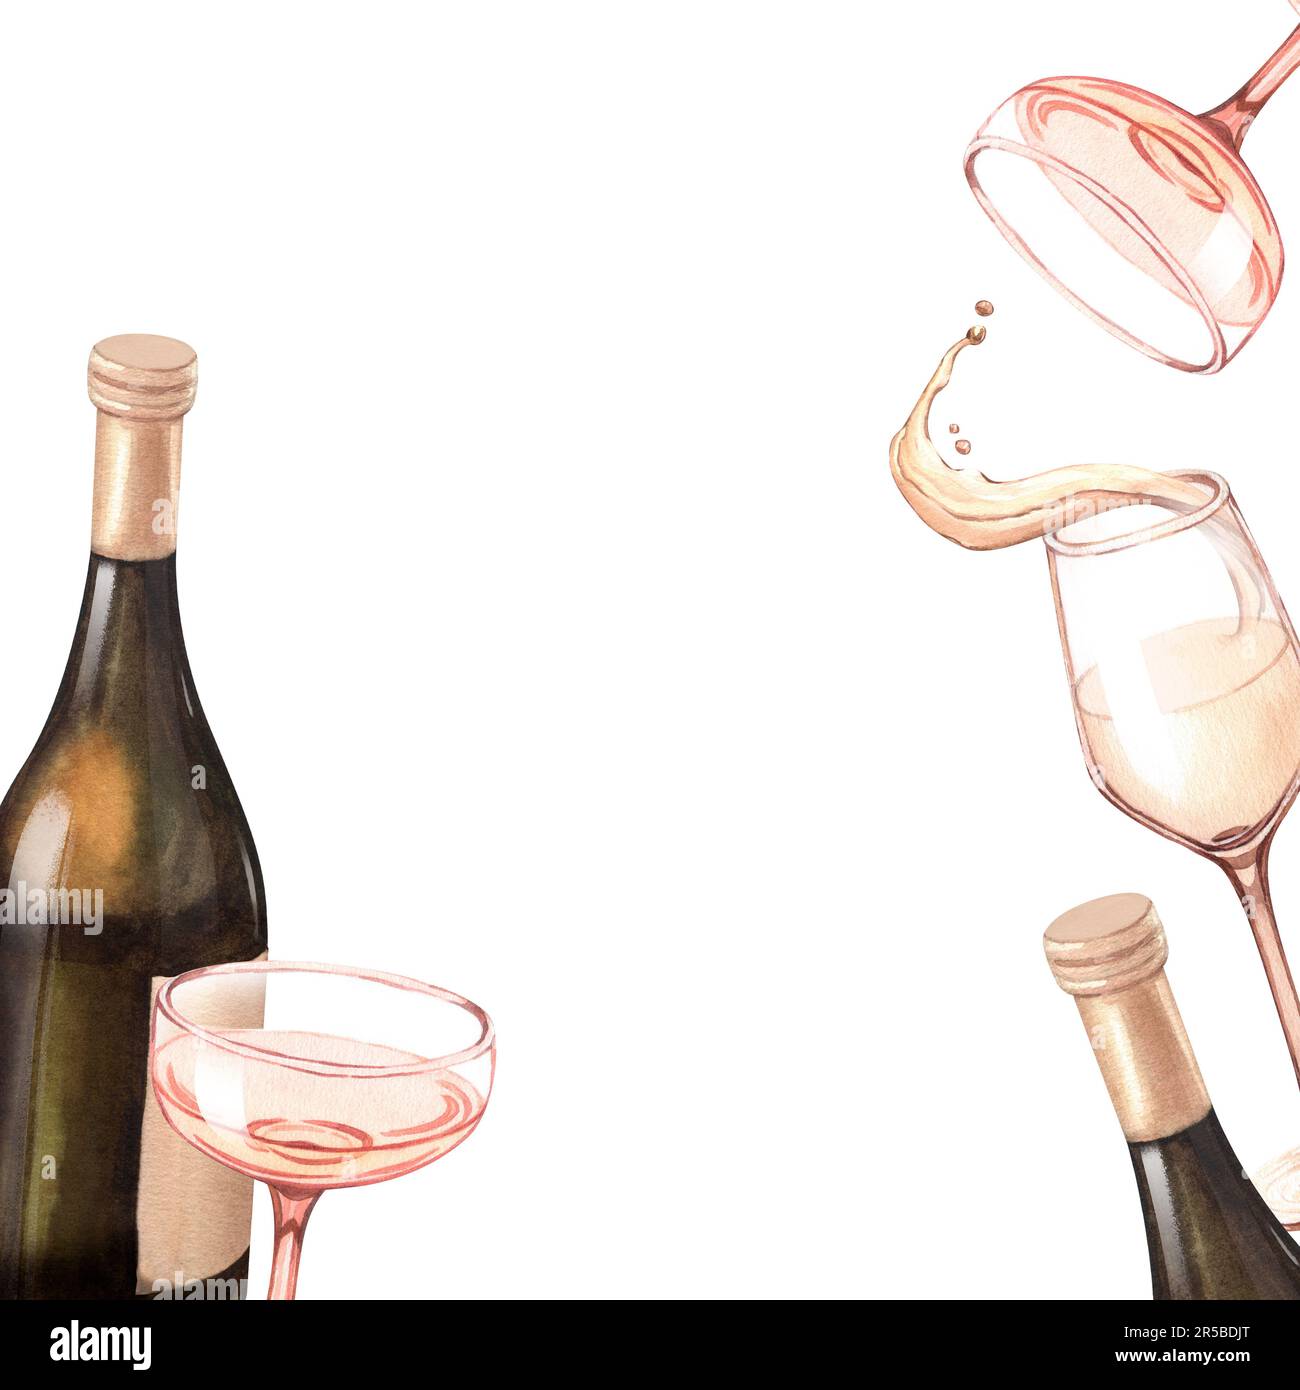 Watercolor illustration of the bottle and one glass of white wine. Picture of a alcoholic drink isolated on the white background. Concept for wine Stock Photo